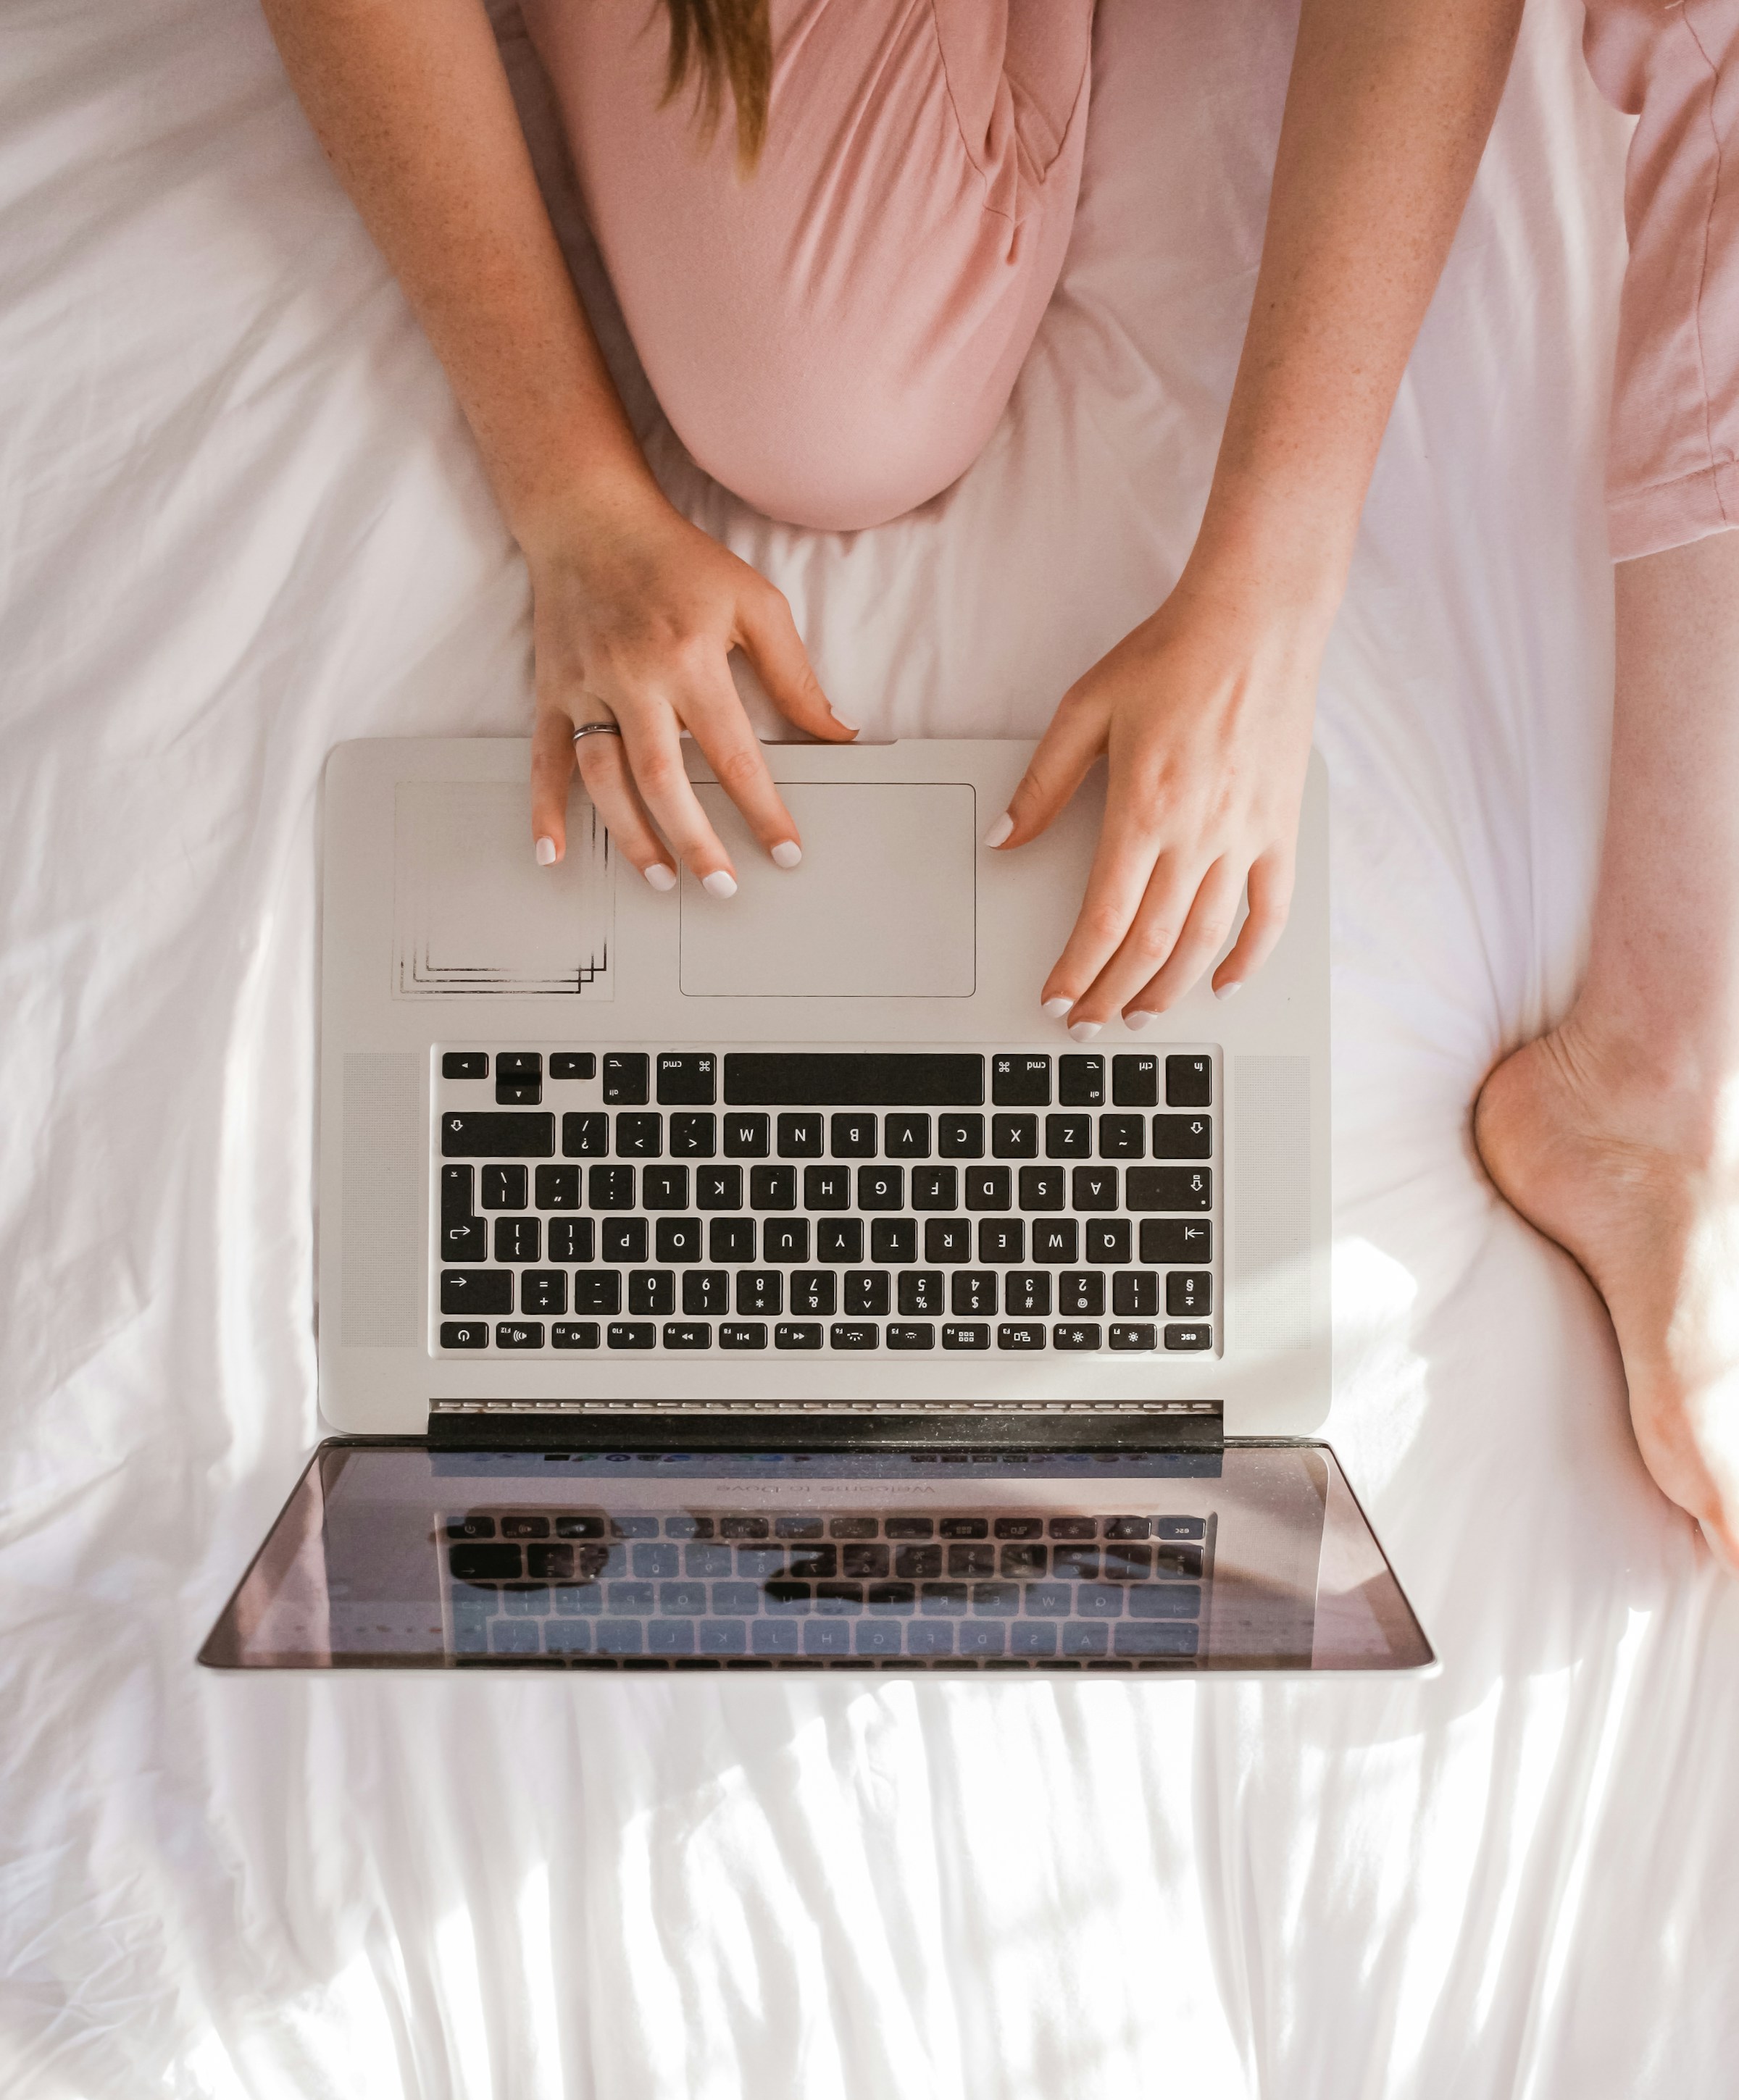 A close-up of a woman using her laptop in bed | Source: Unsplash